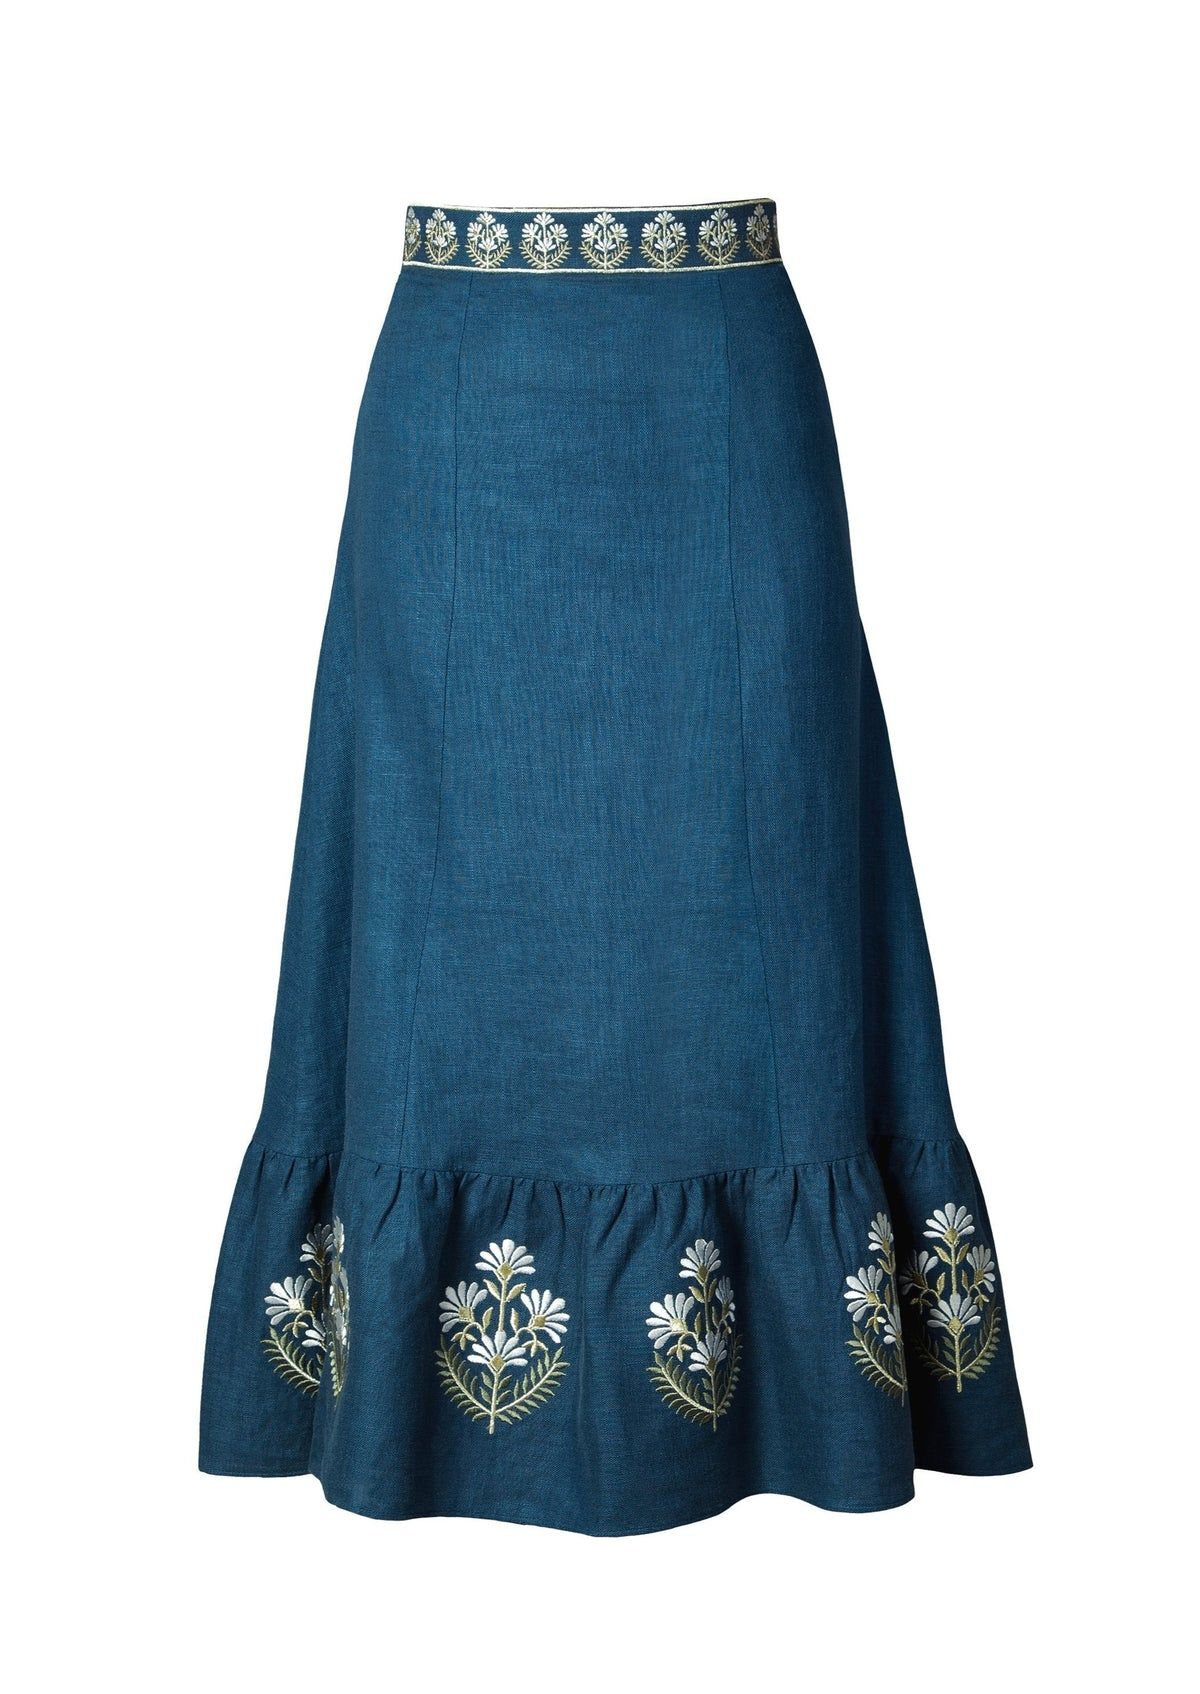 Ayan Skirt in Blue | Over The Moon